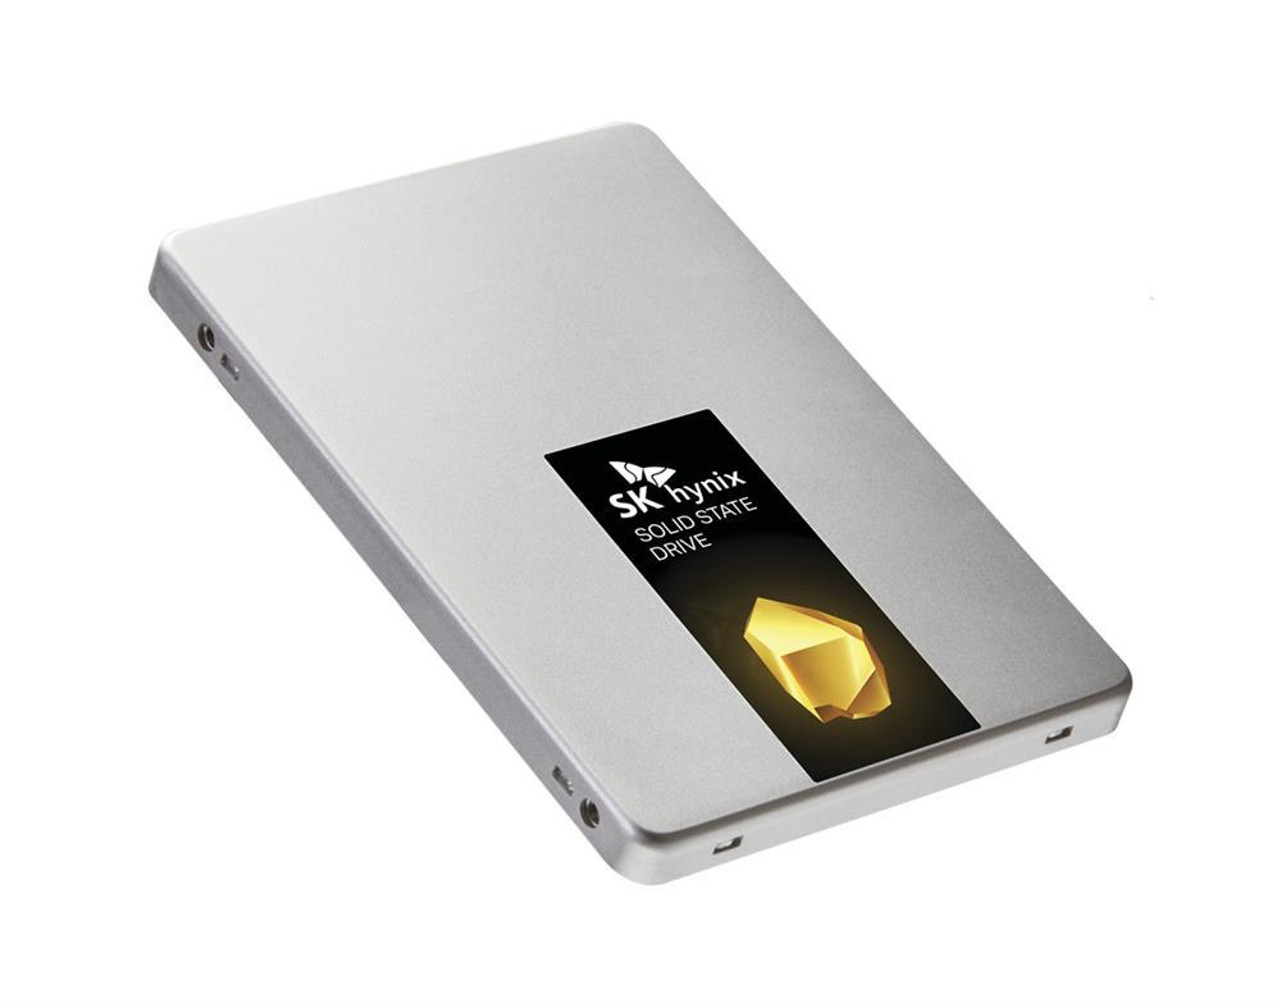 B07SK5BNM1 Hynix Gold S31 500GB SATA 6GB S Up To 560Mb S 2.5 SSD Solid State Drive